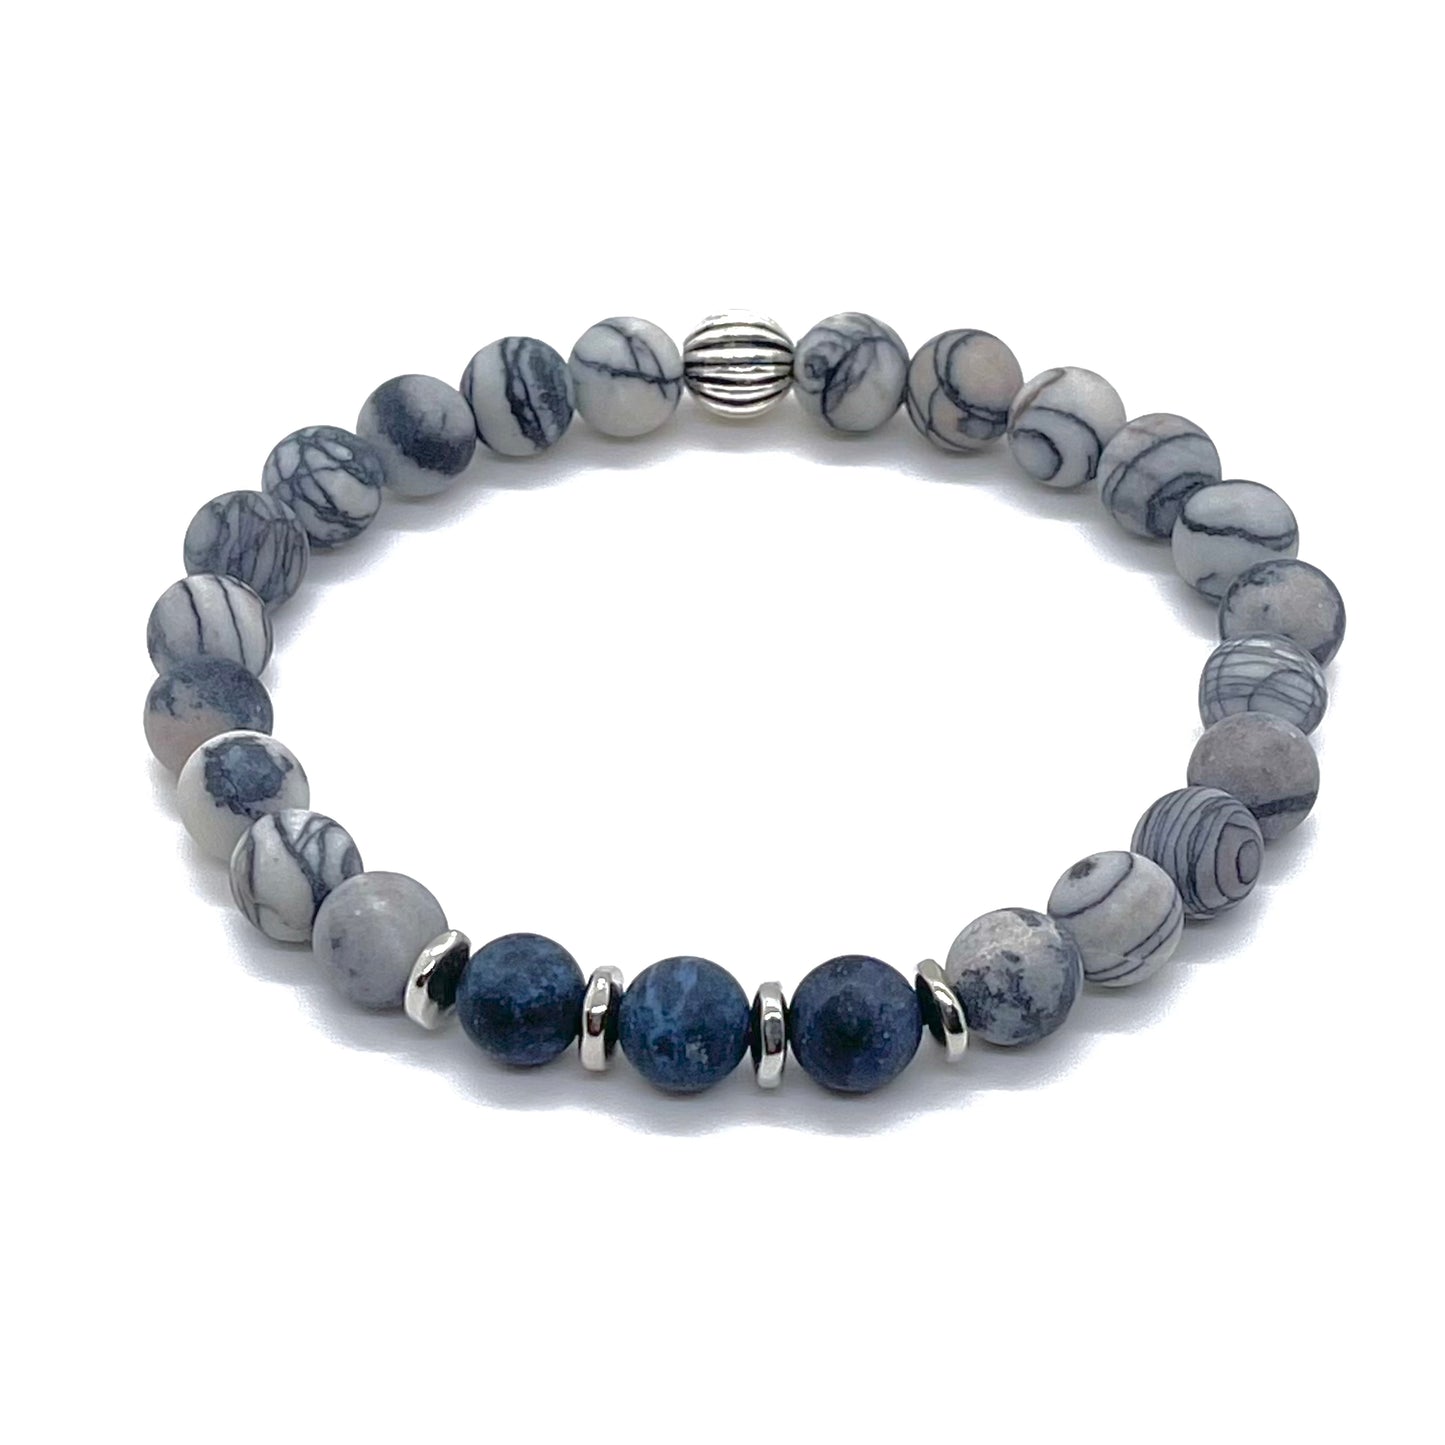 Mens gemstone bracelet with matte black and white silk stone and blue dumortierite and silver on stretch cord.